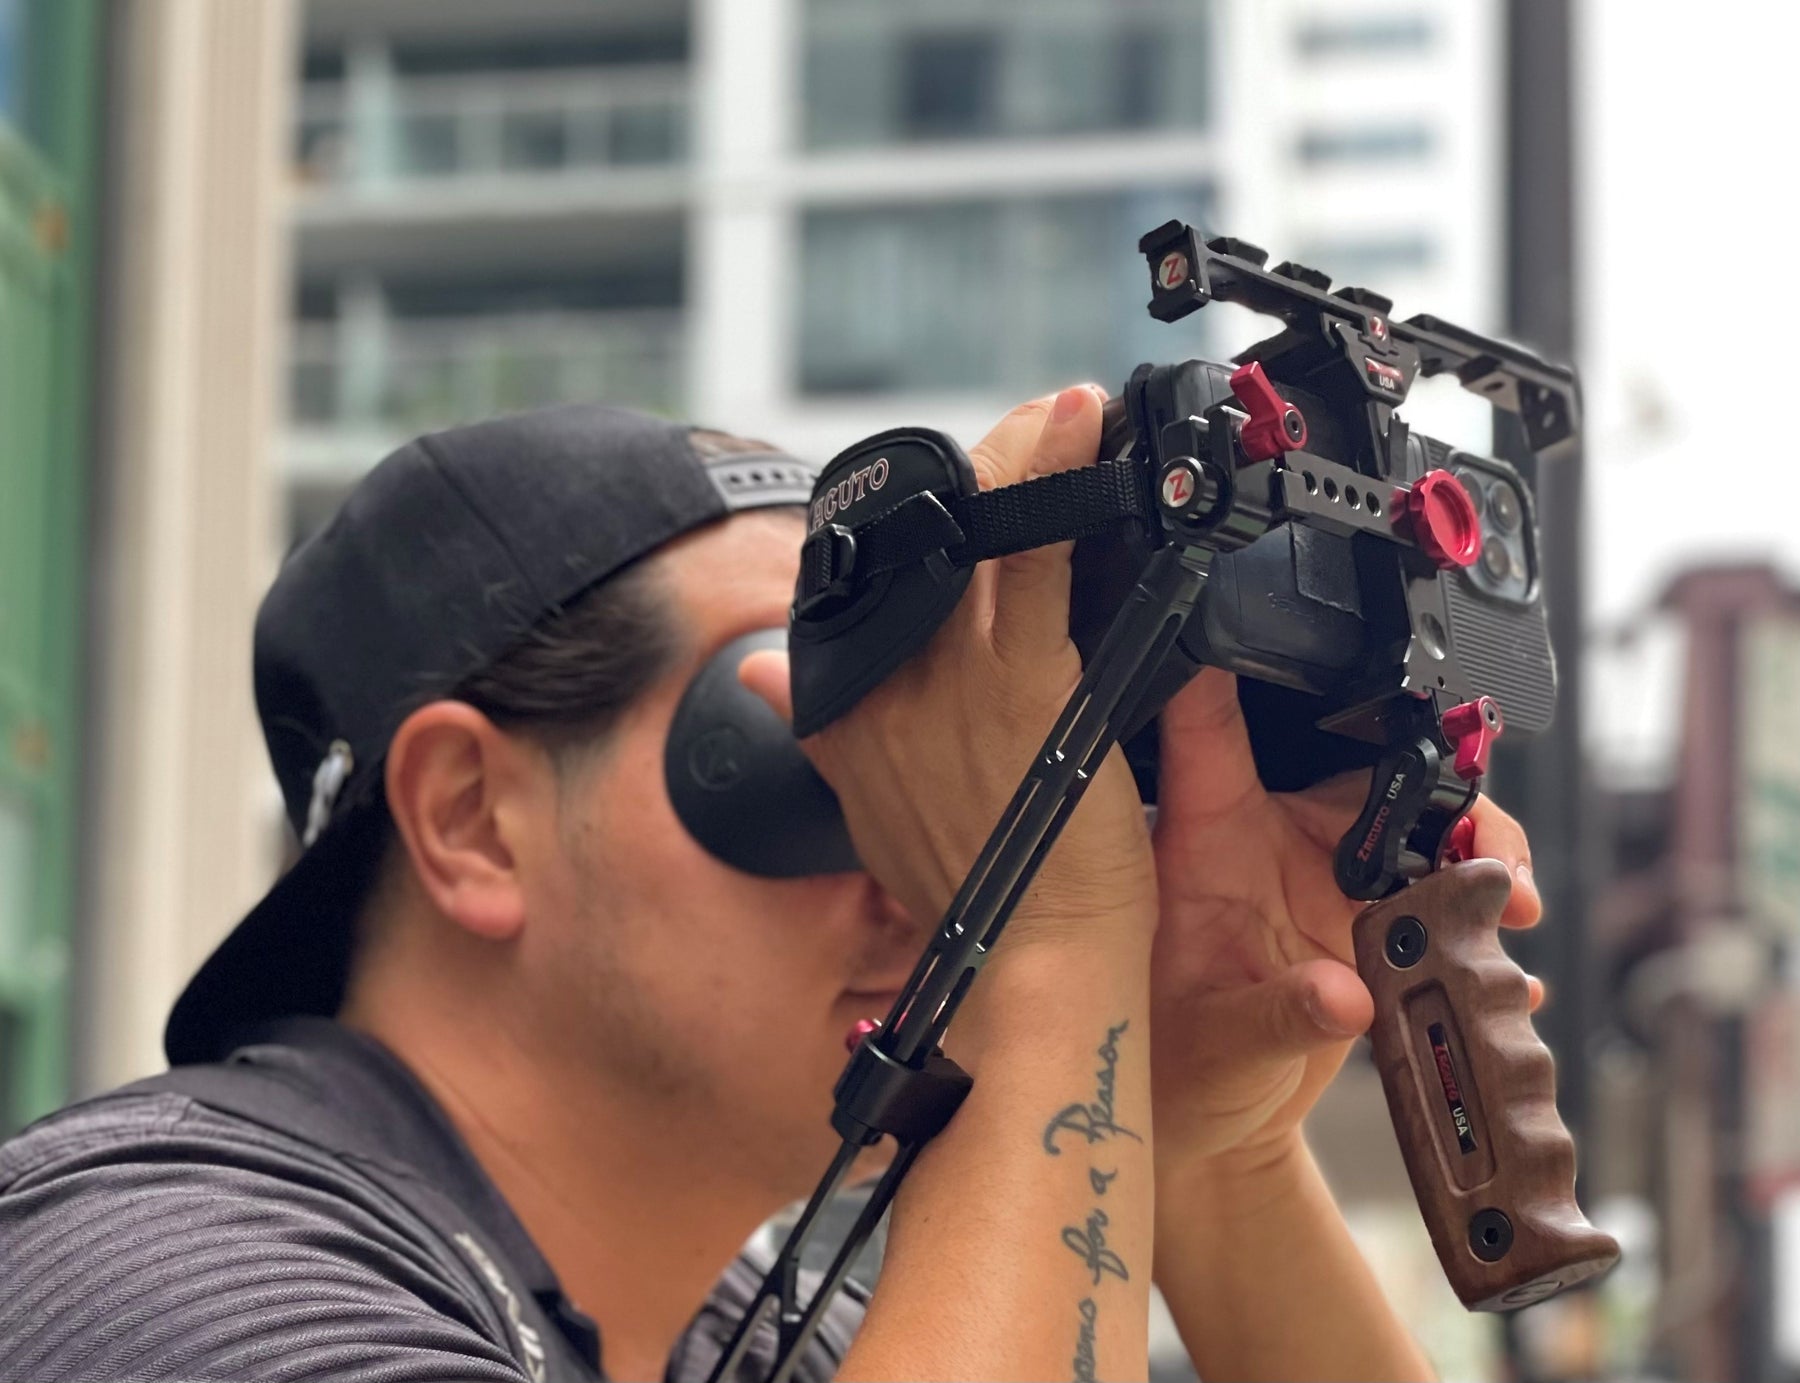 Filming made easy with your phone and a smartphone viewfinder in the city